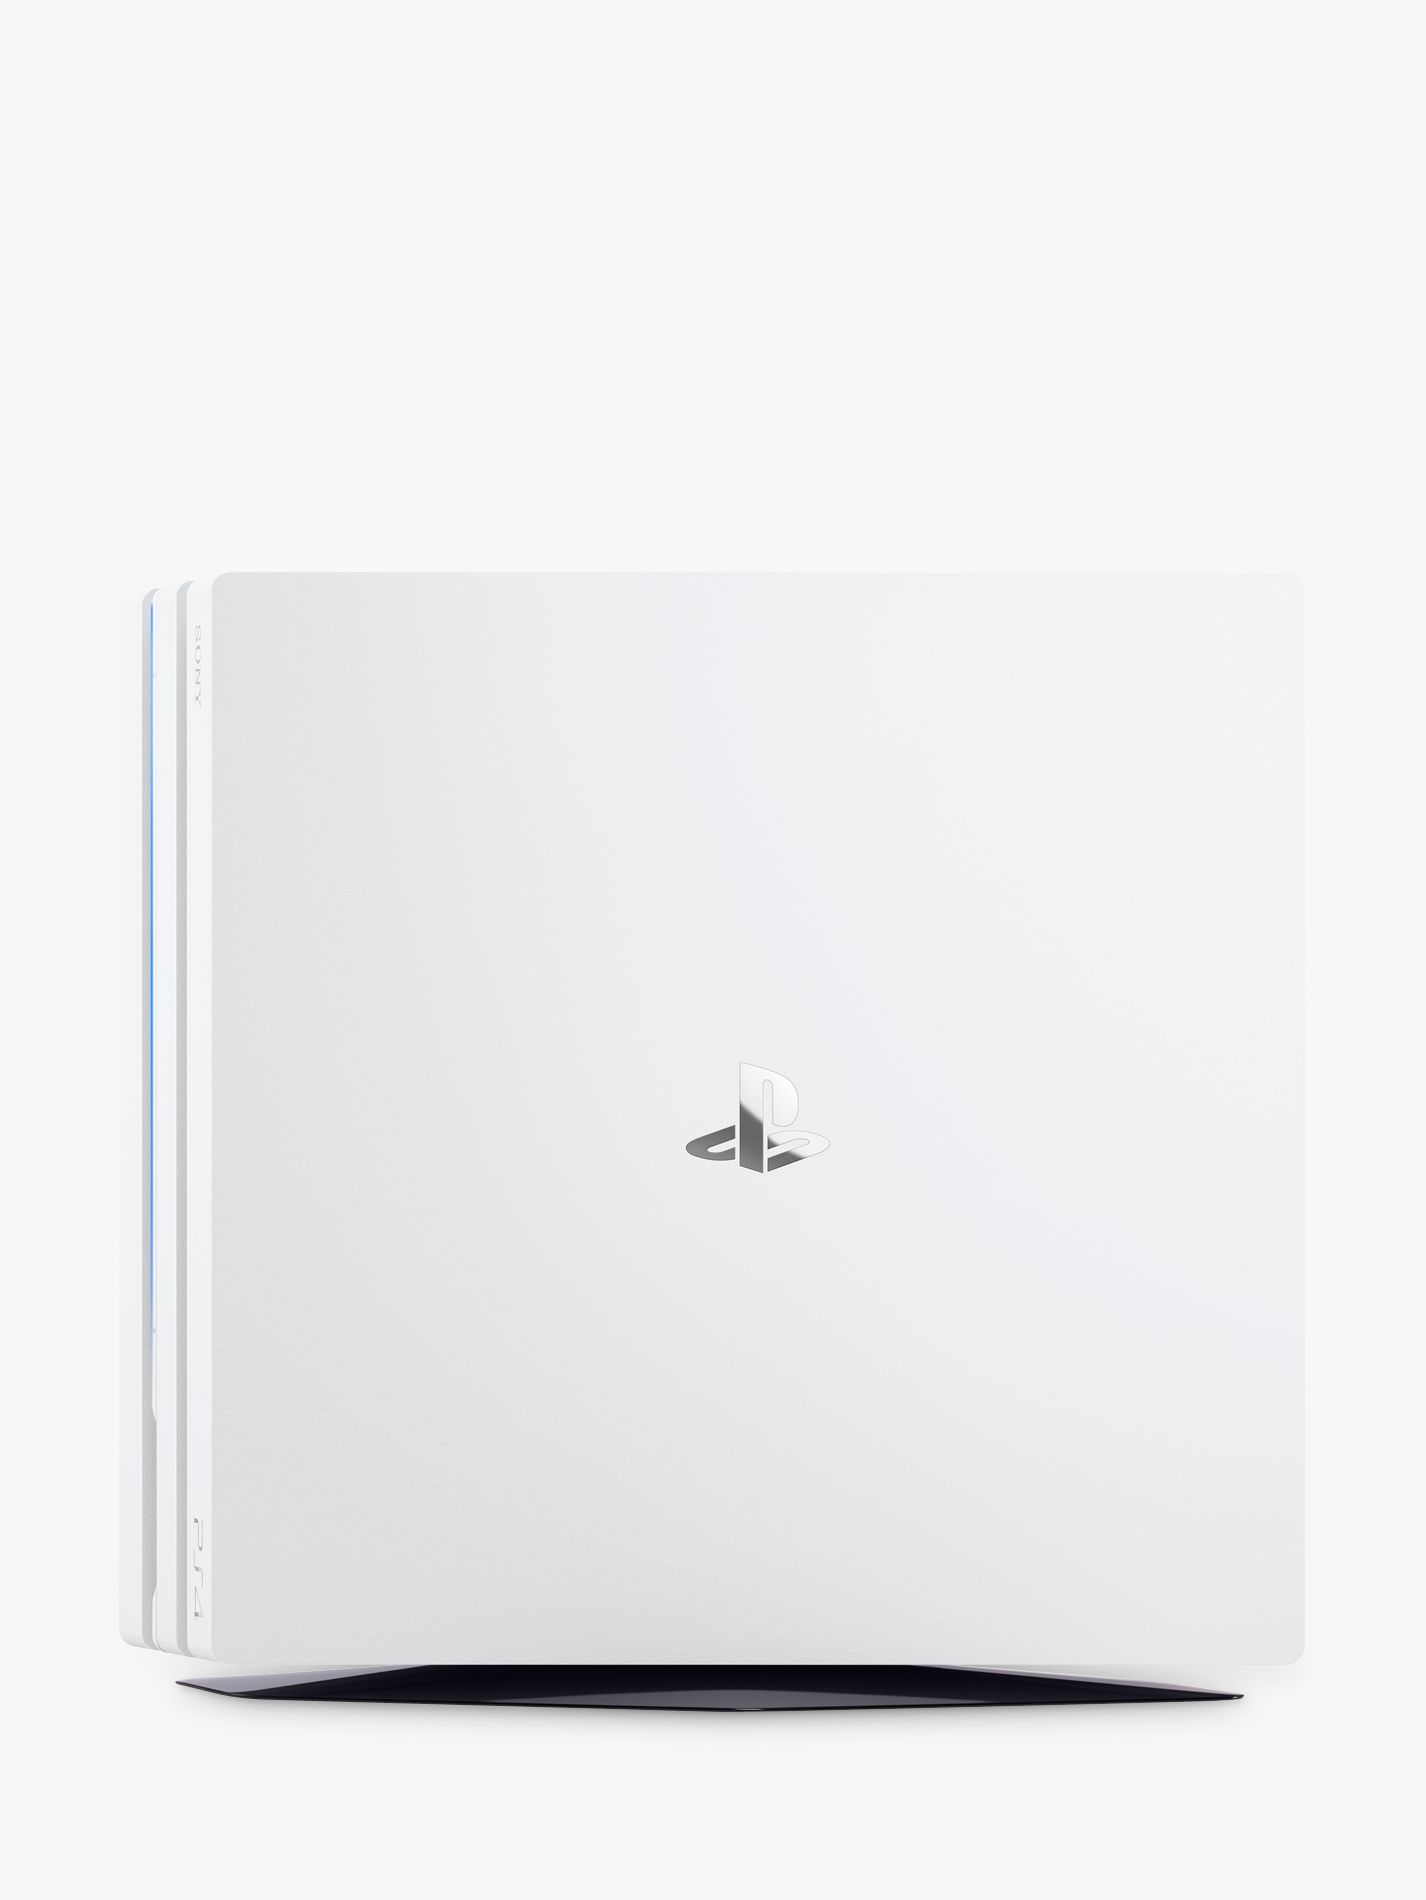 Sony Playstation 4 Pro Console 1tb With Dualshock 4 Controller Glacier White At John Lewis Partners